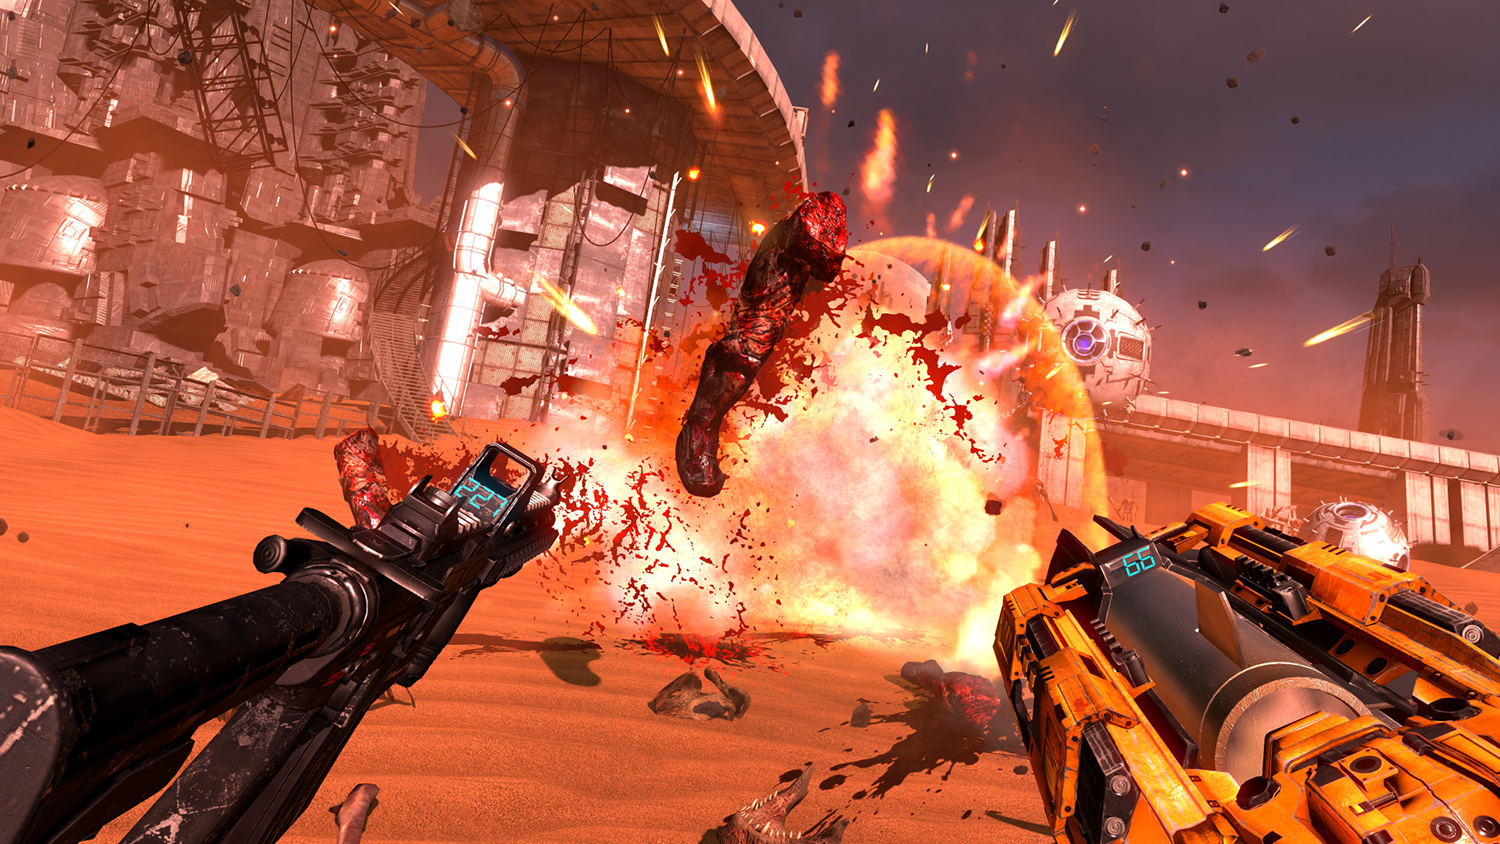 serious sam vr brings frantic fps action to oculus htc vive the last hope 0003